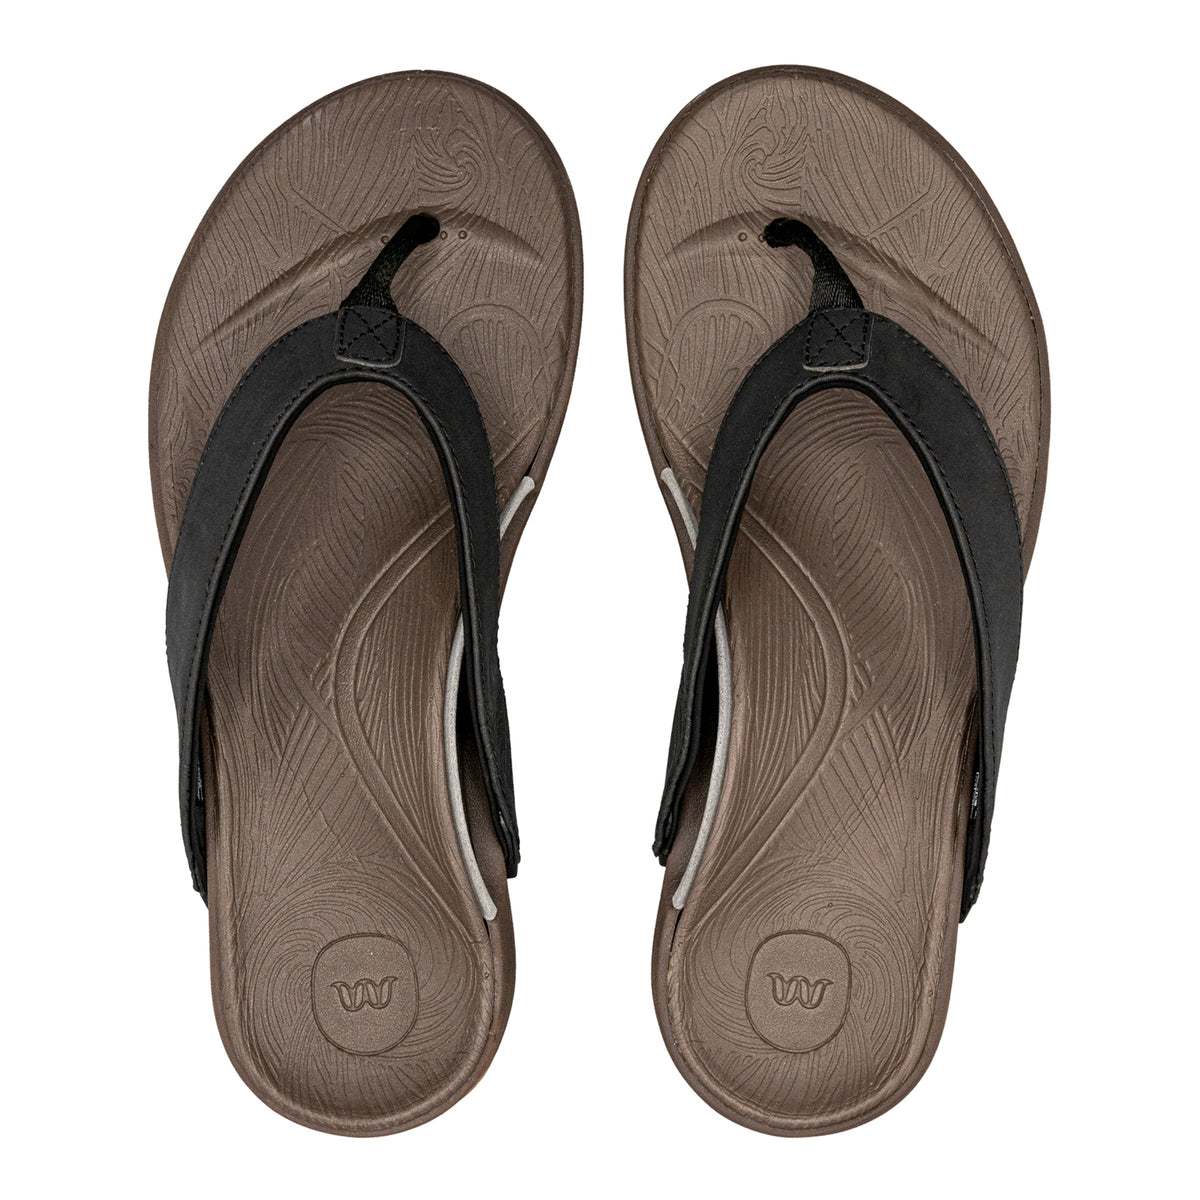 Women's Custom Arch Support Sandals - FitMyFoot